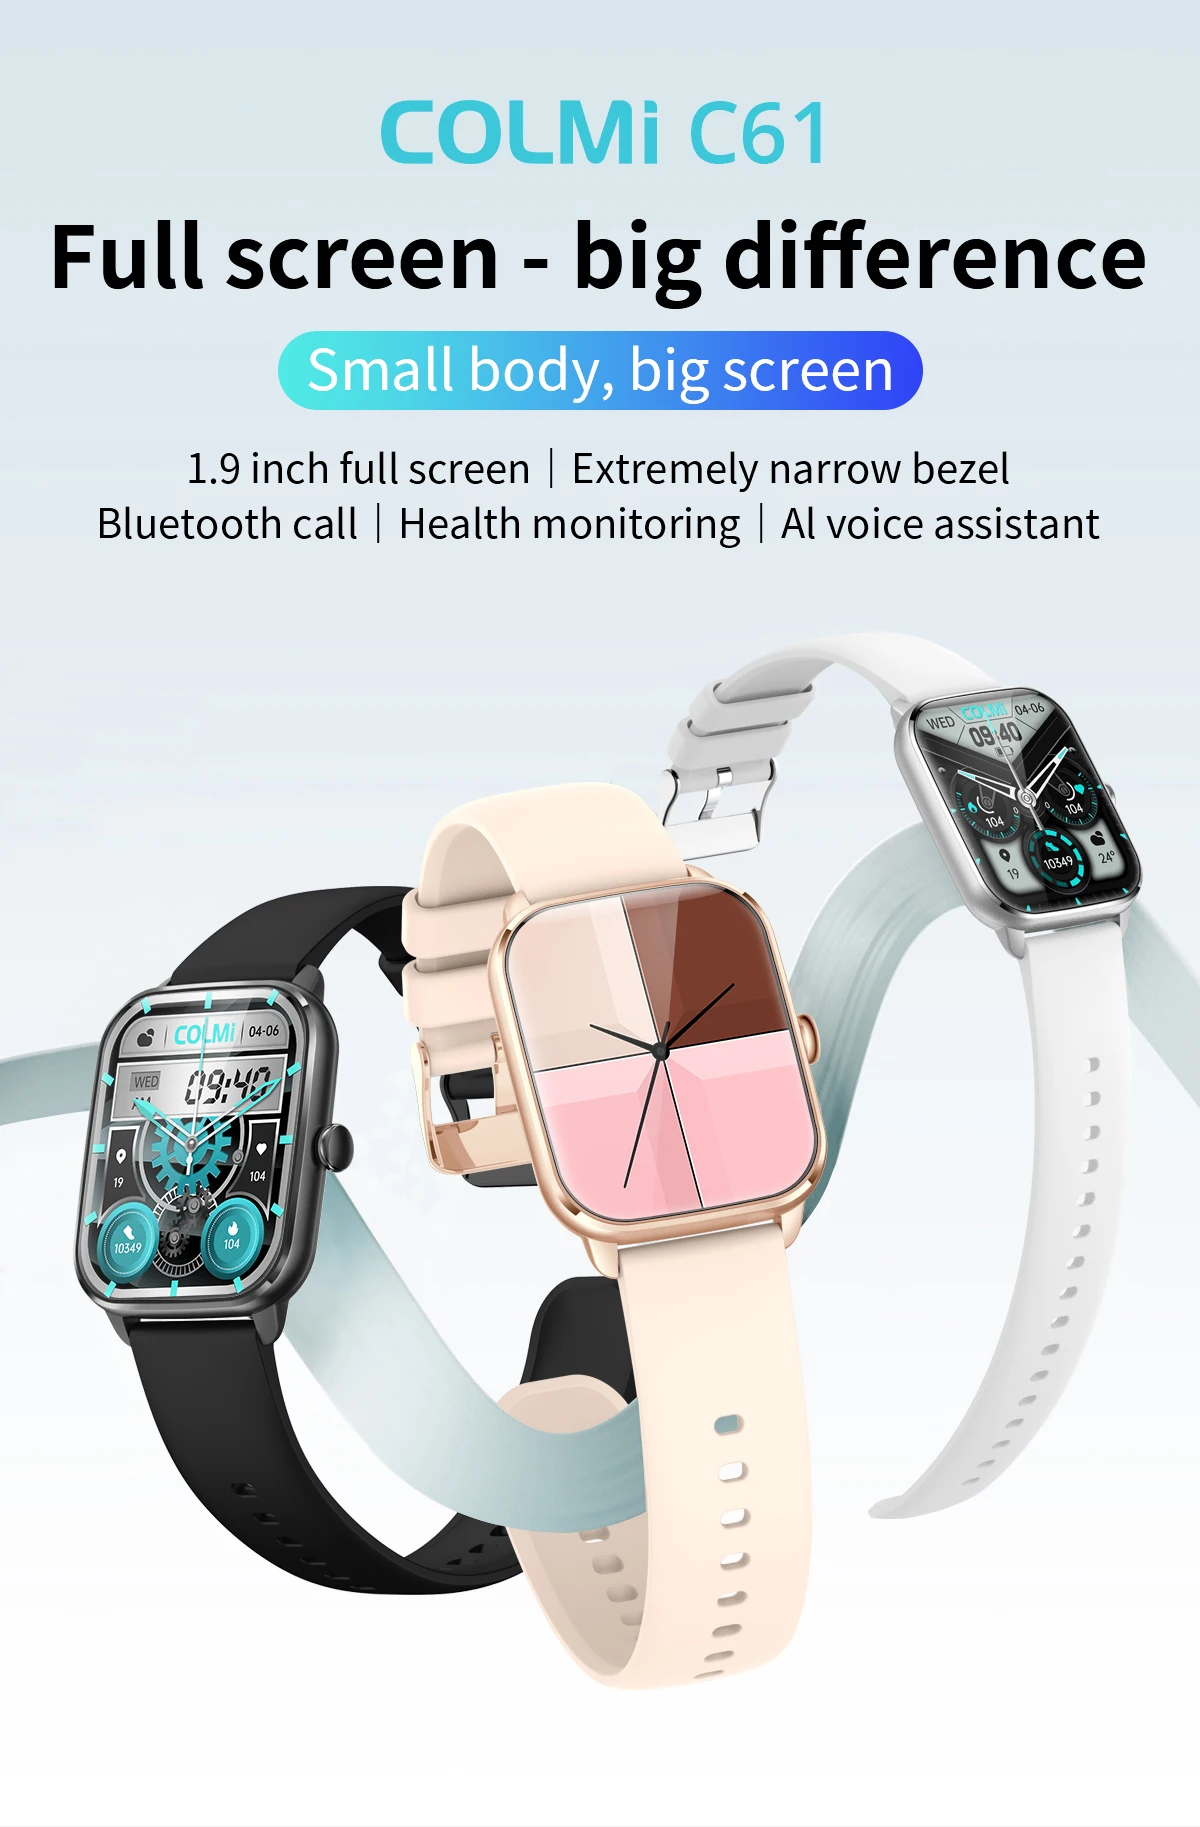 COLMI 1.4 inch Waterproof Android Smart Watch: Full Touch Screen